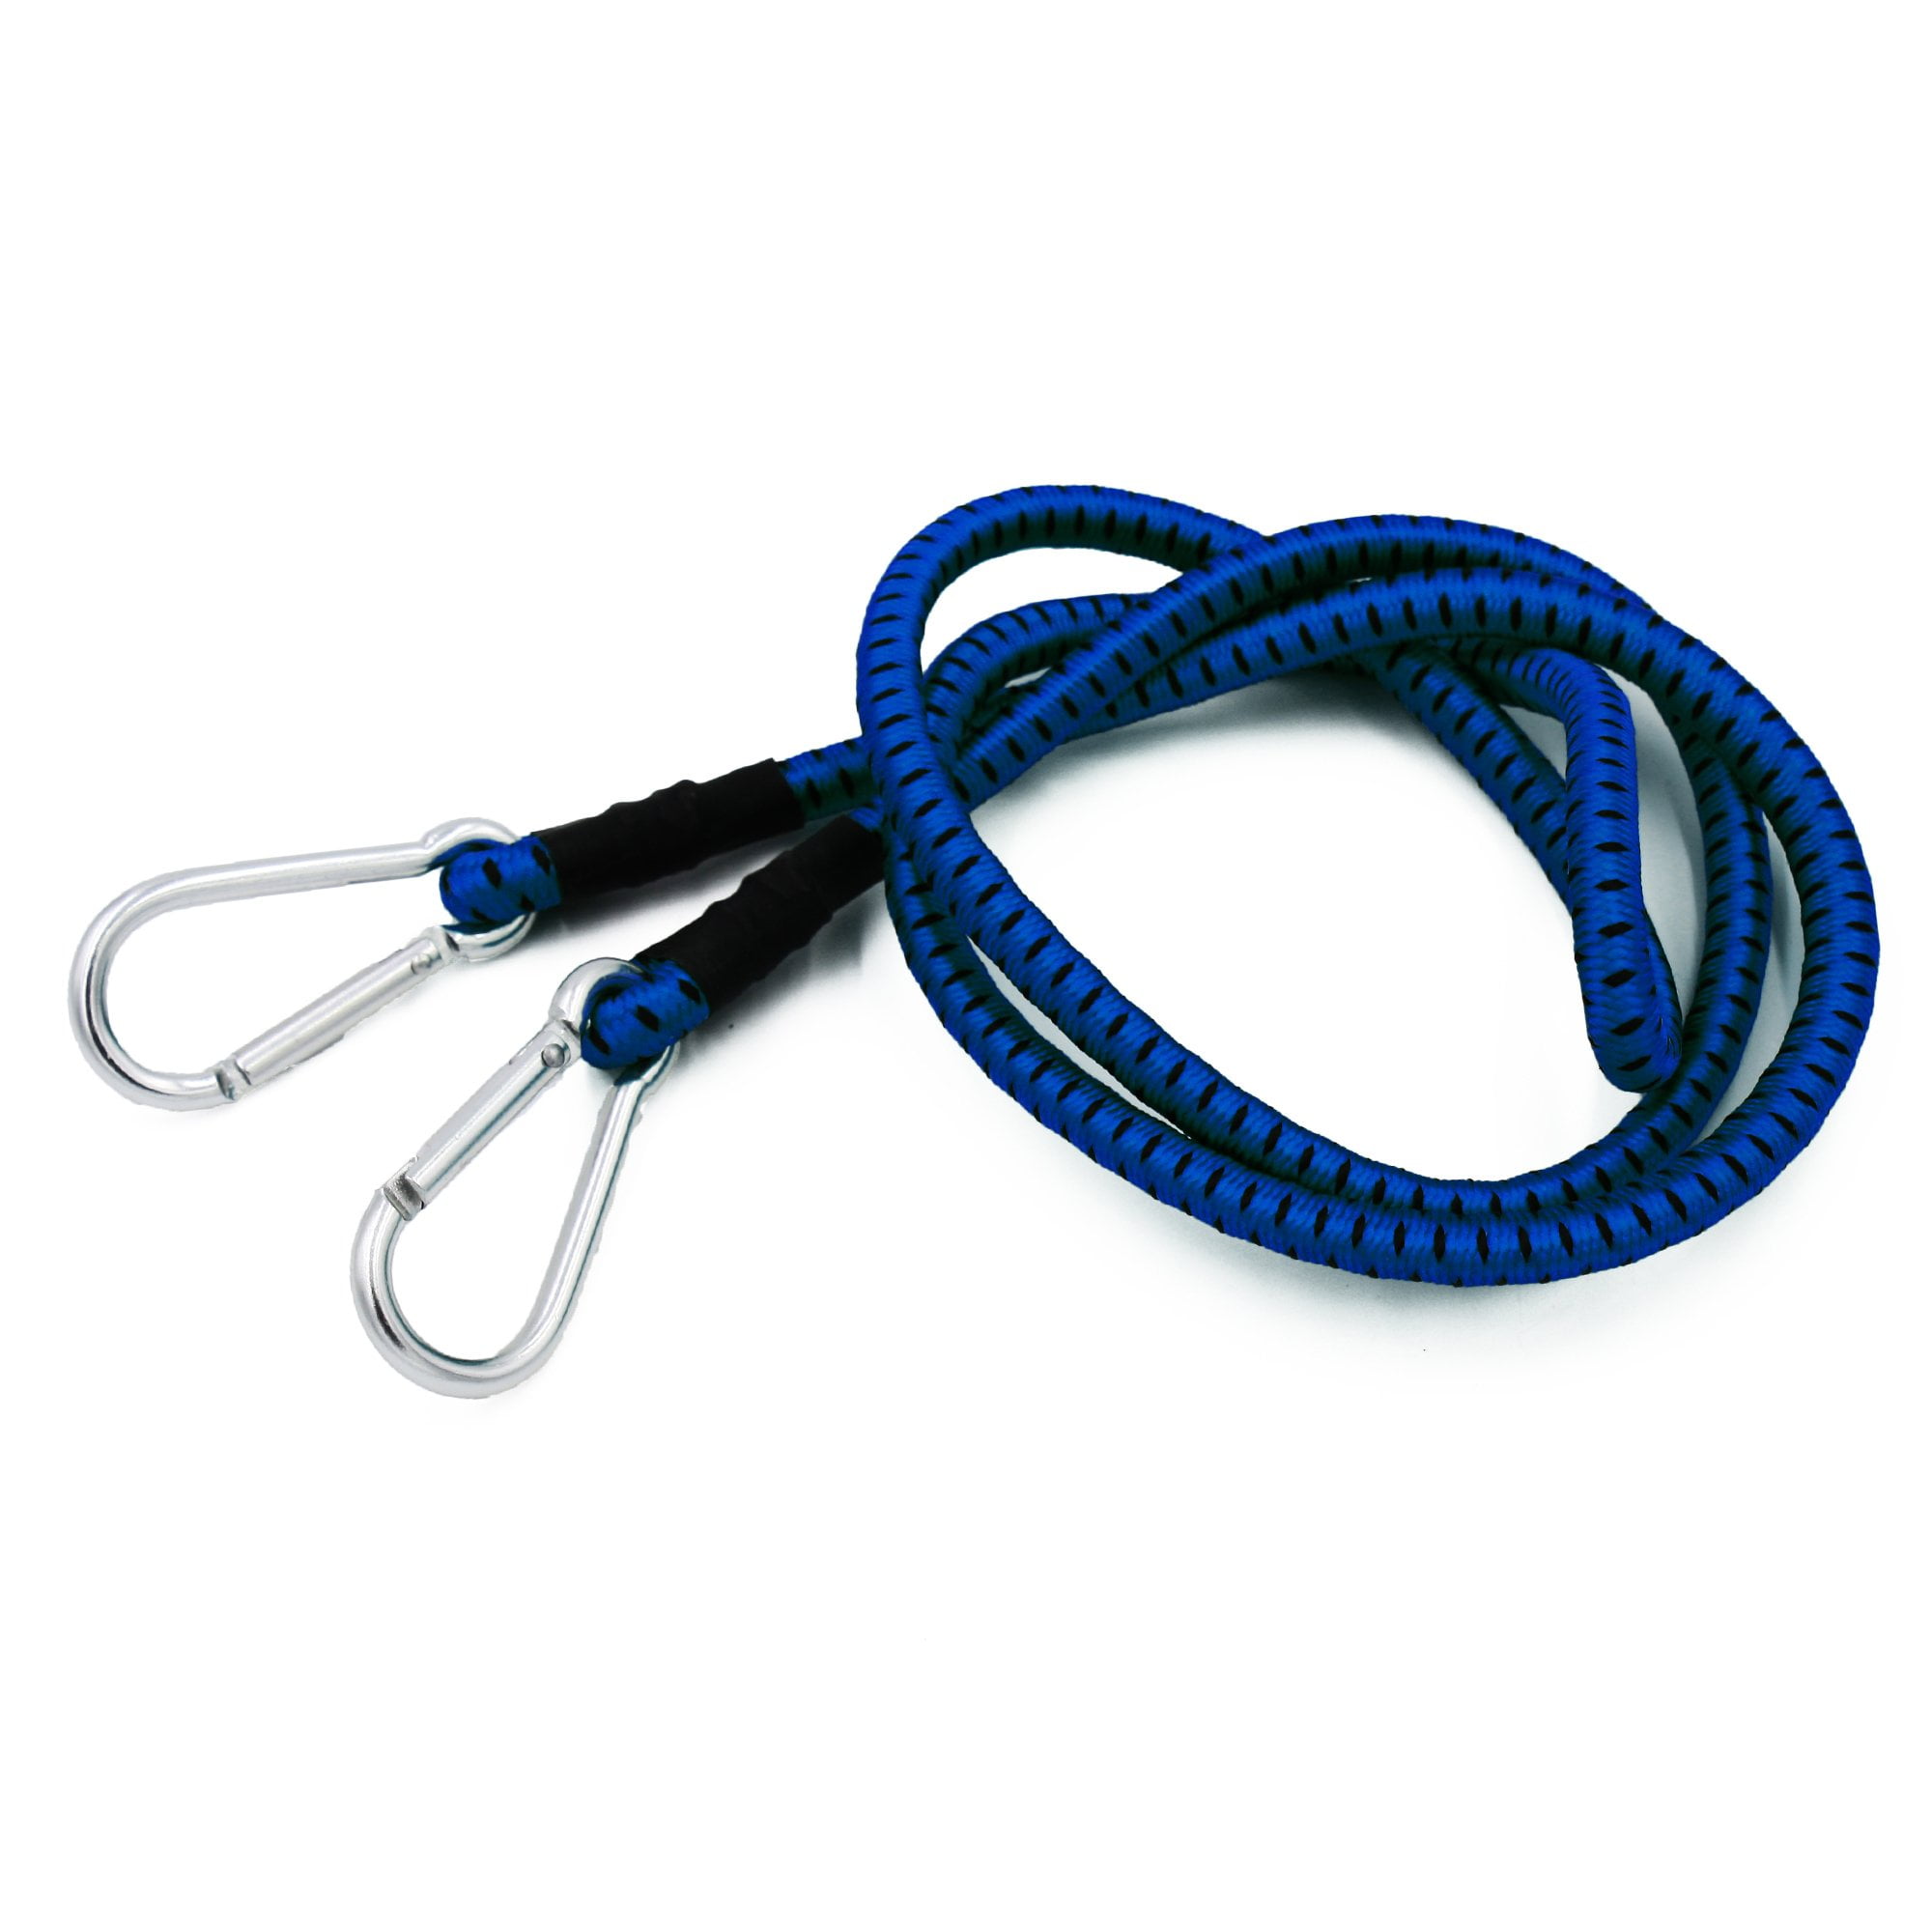 72" LONG BUNGEE CORD NEW 